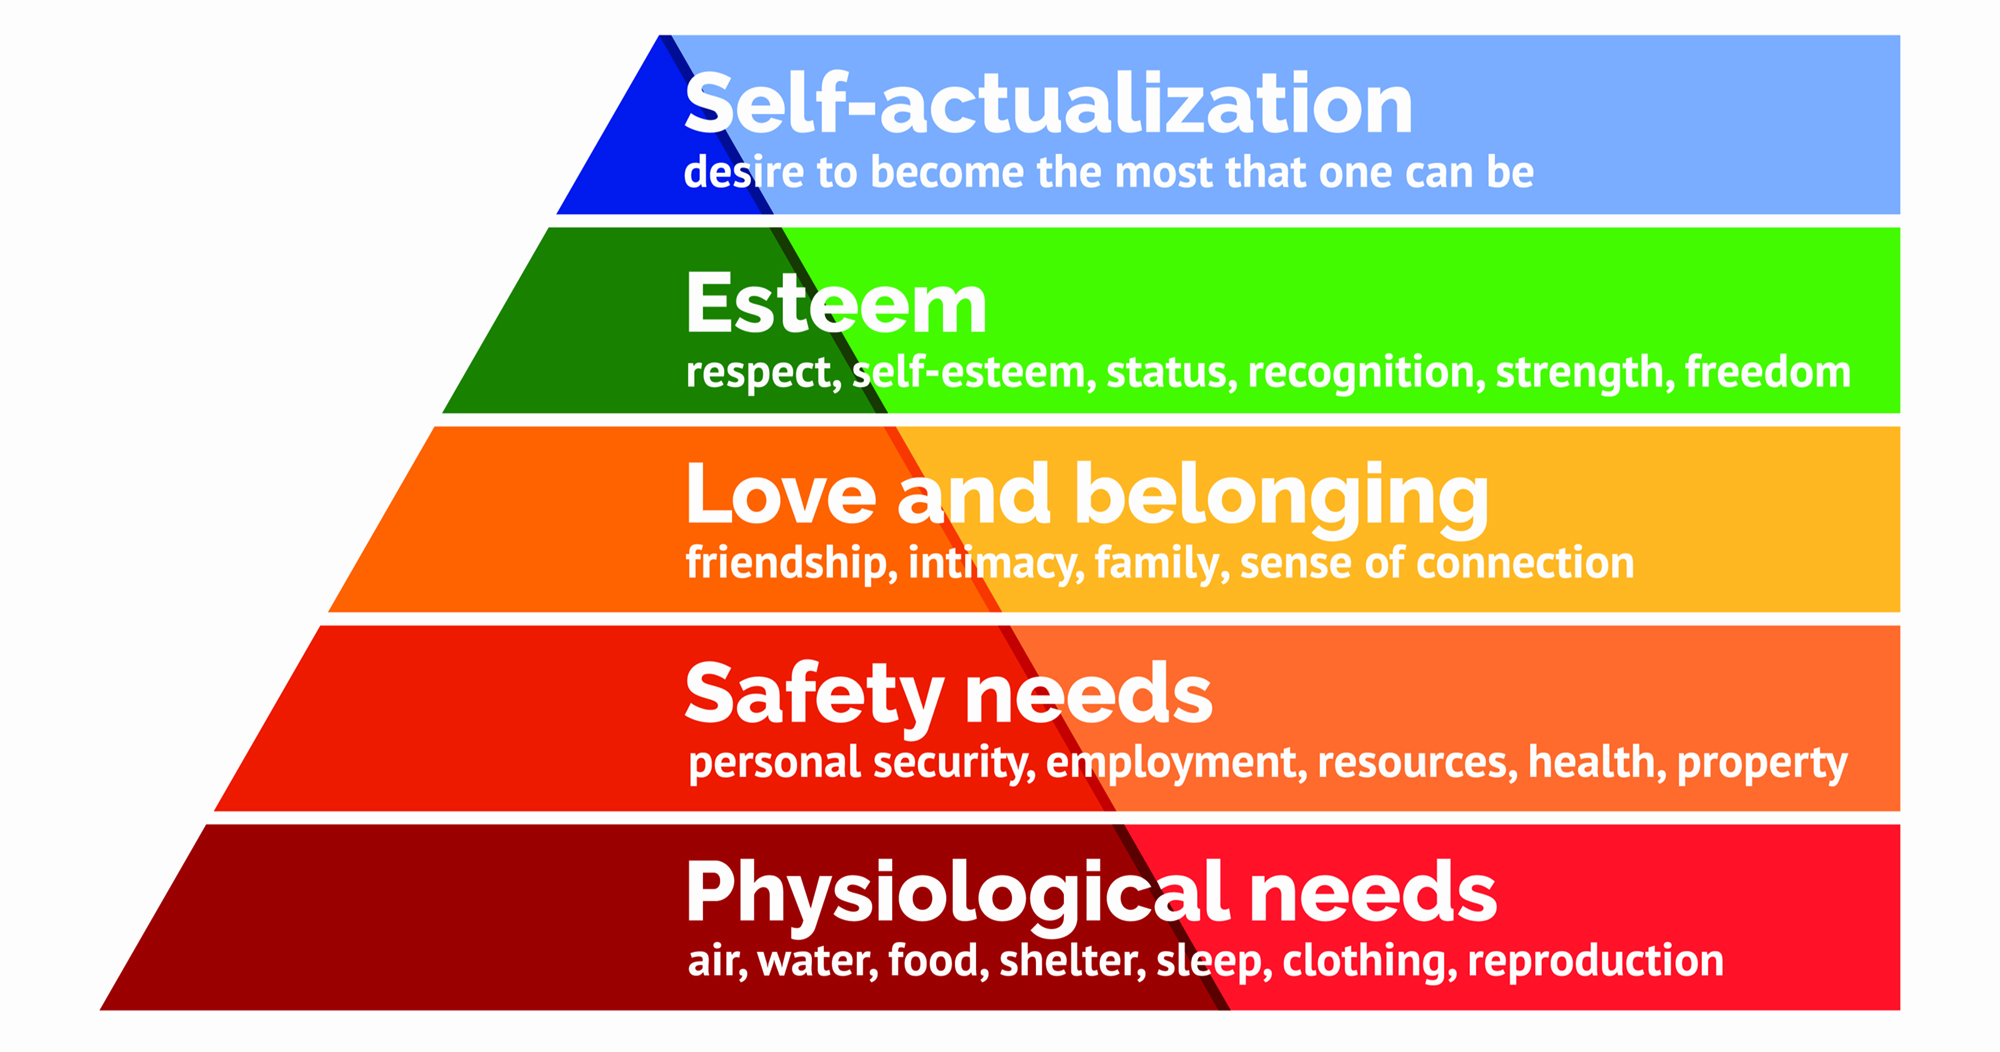 maslow-s-hierarchy-of-needs.jpg